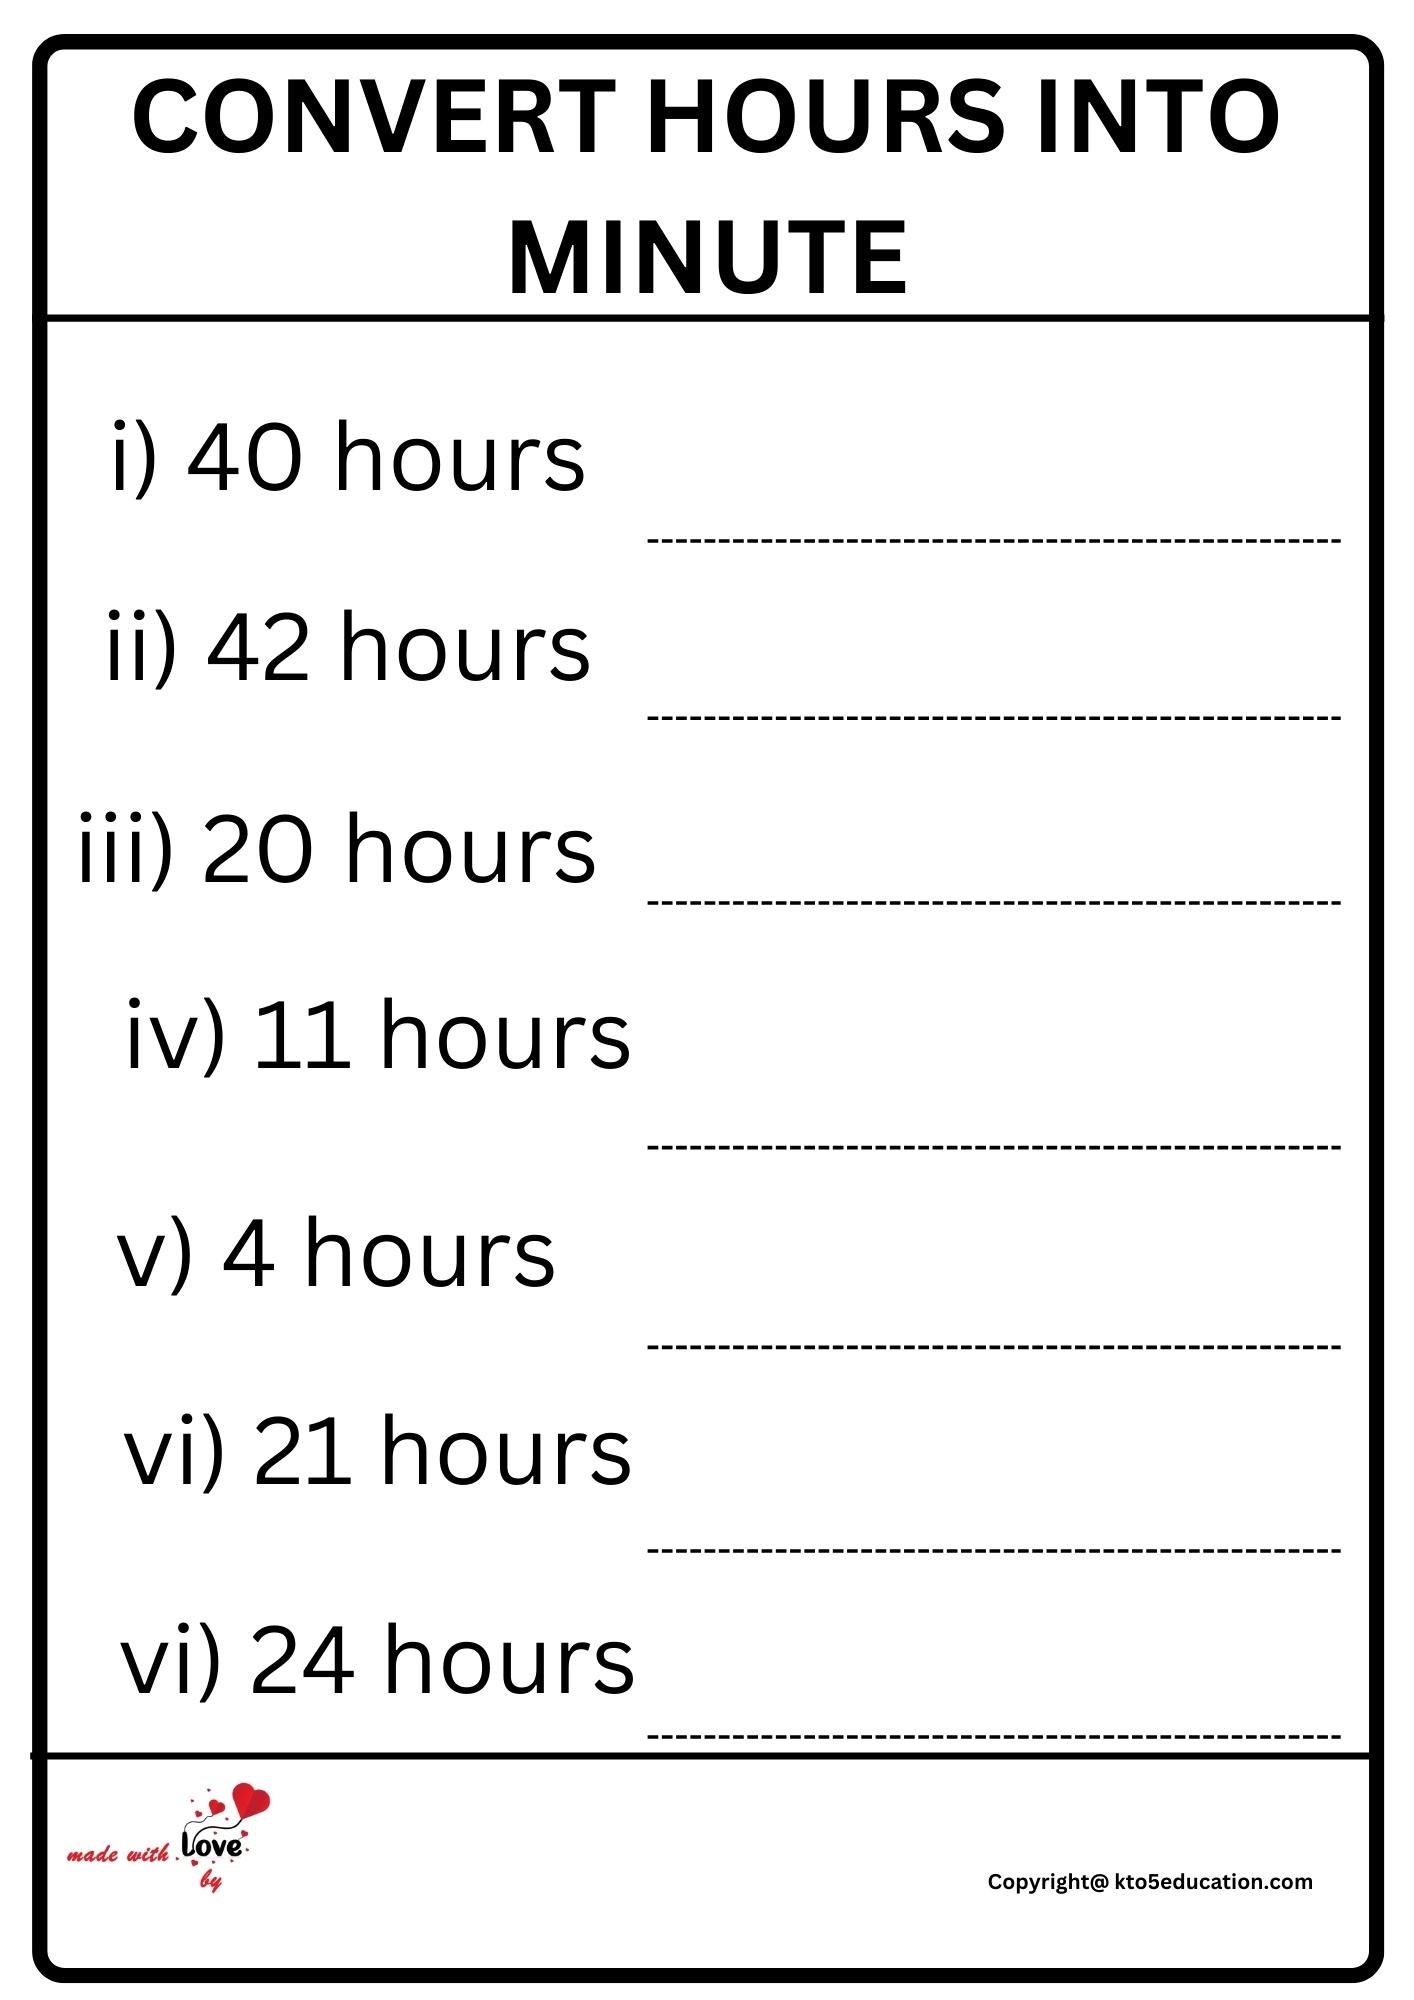 Convert Hours Into Minute Worksheet 2